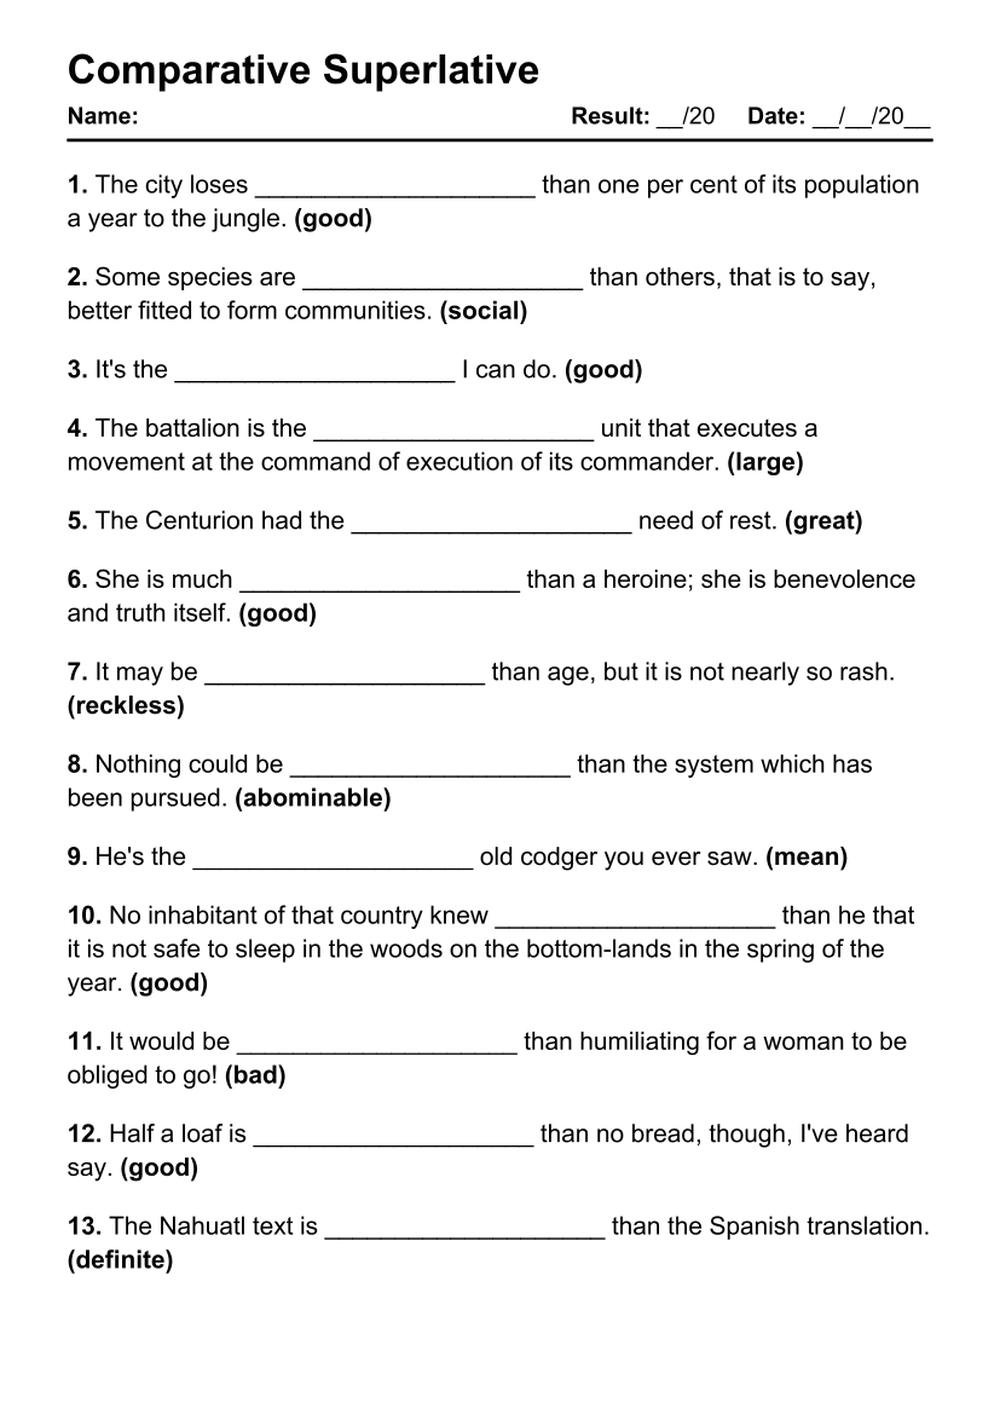 Printable Comparative Superlative Exercises - PDF Worksheet with Answers - Test 95